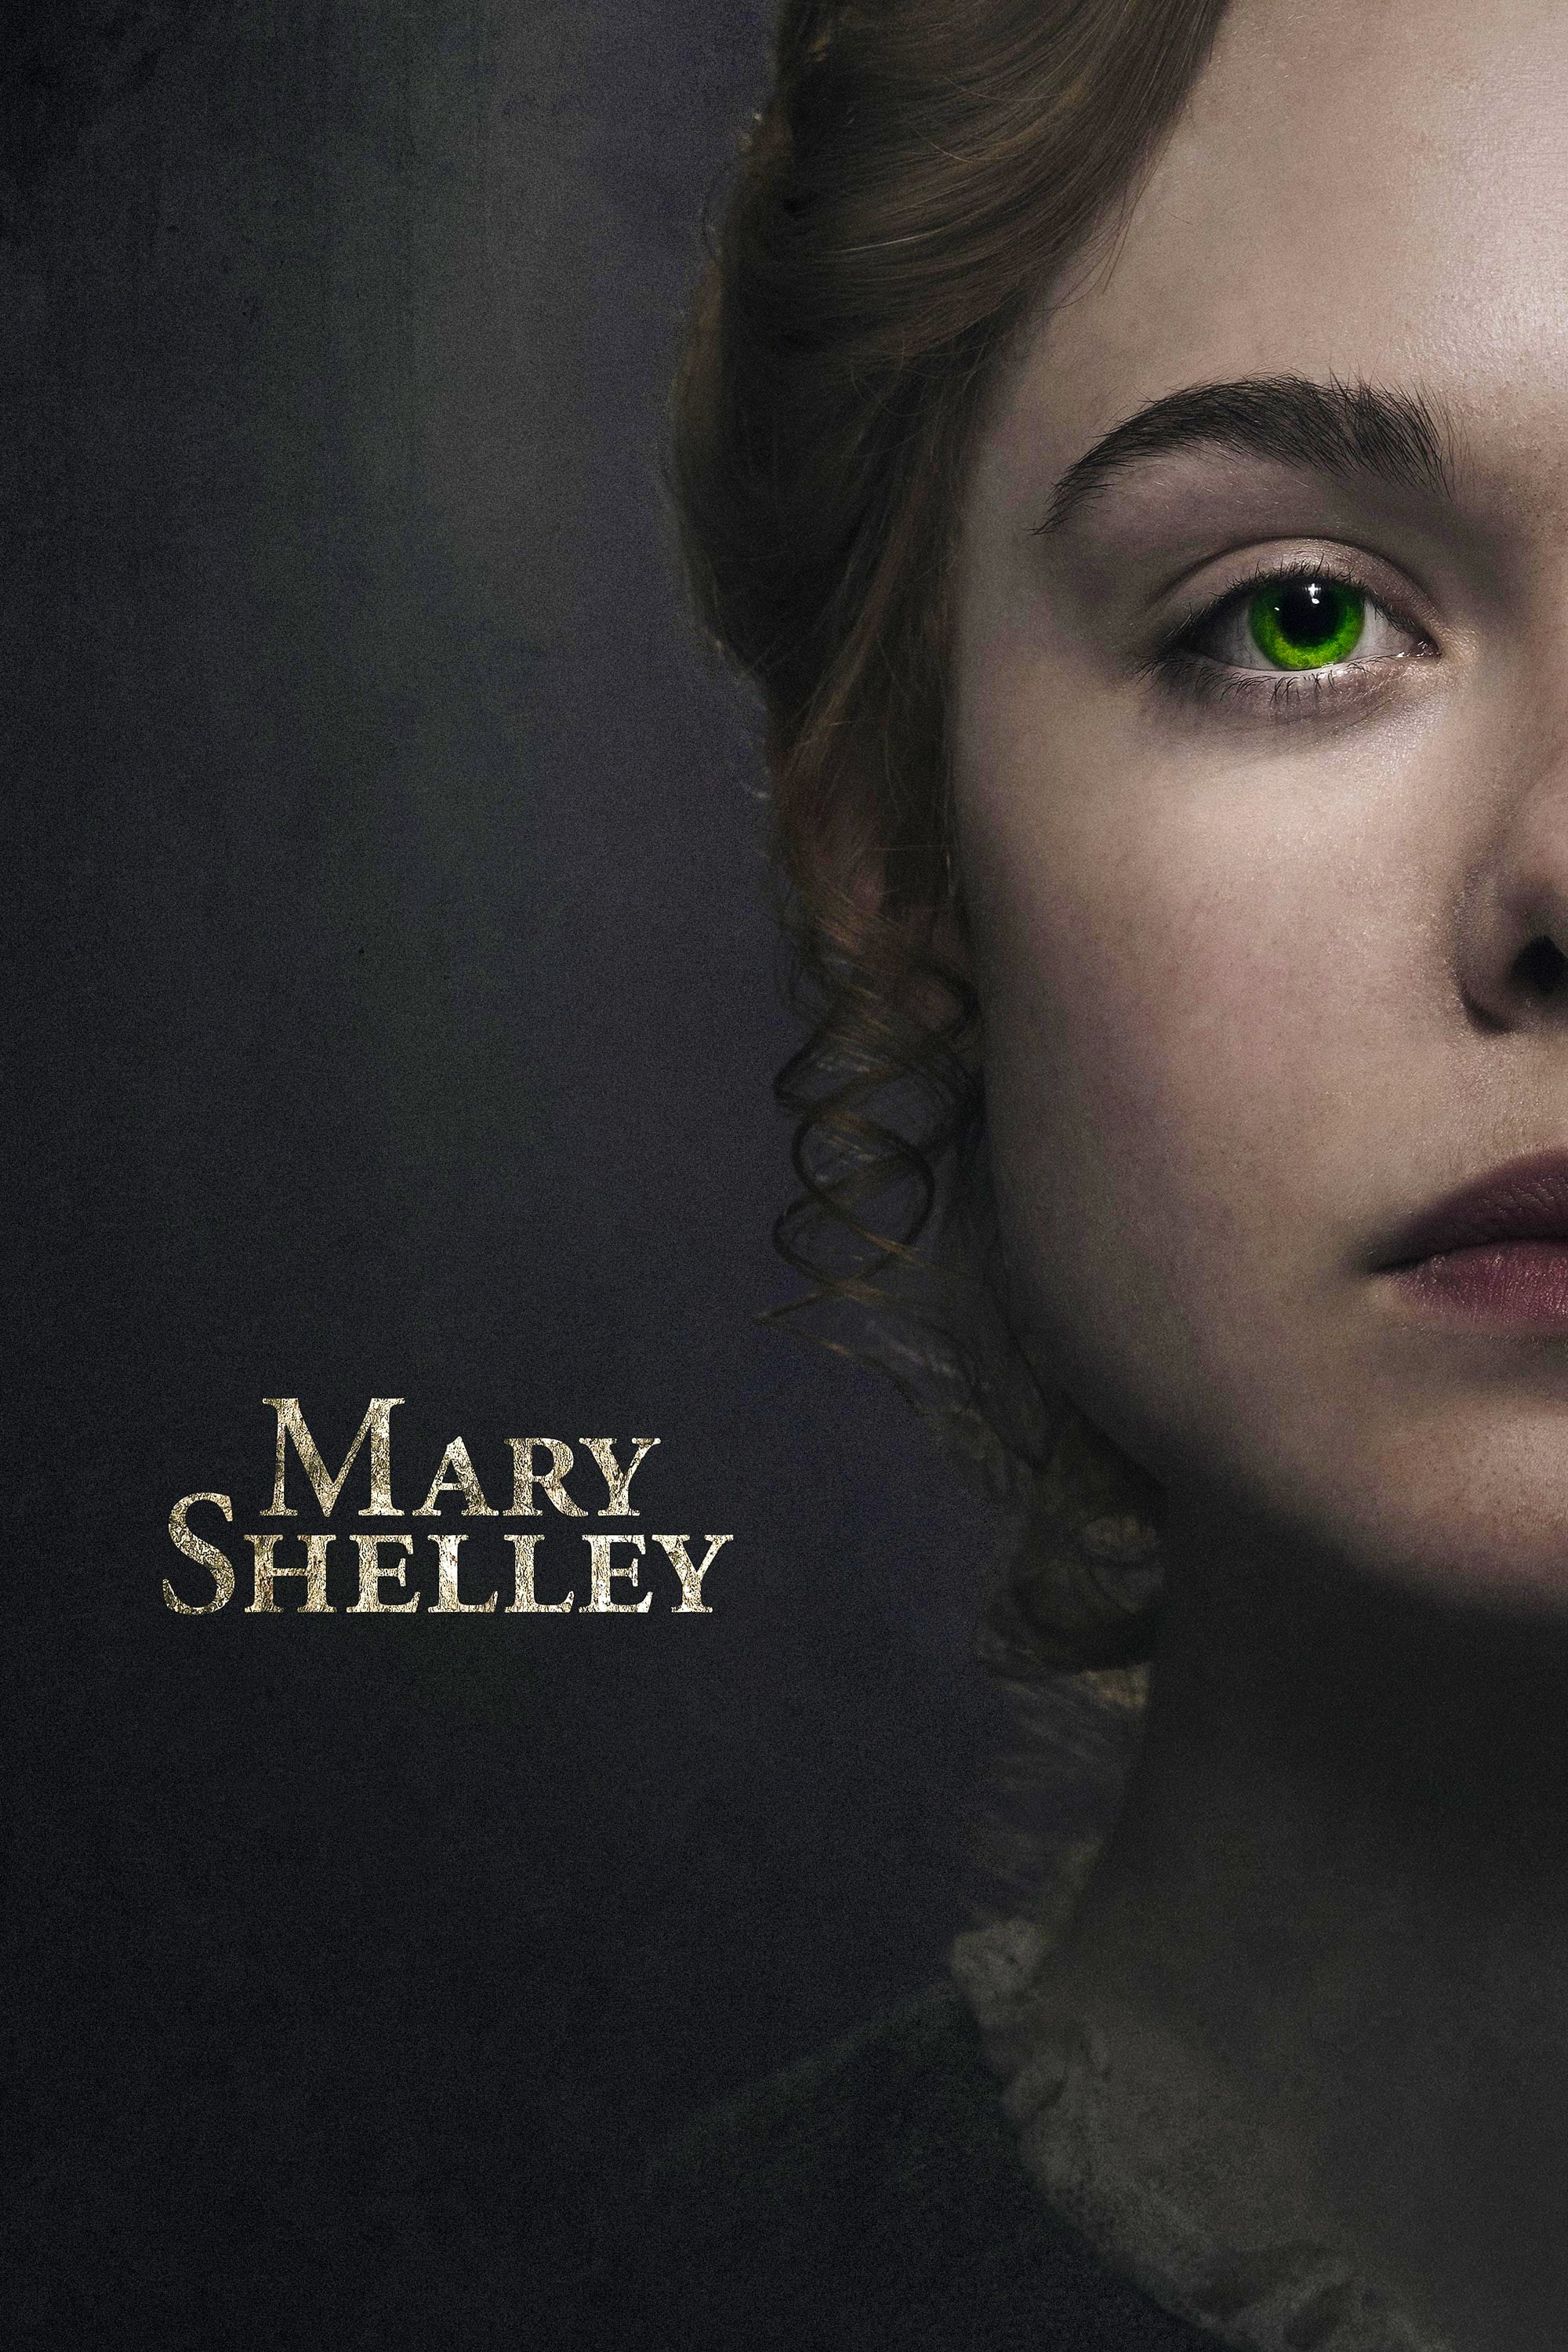 Index of /Movie/Mary Shelley (2017)/